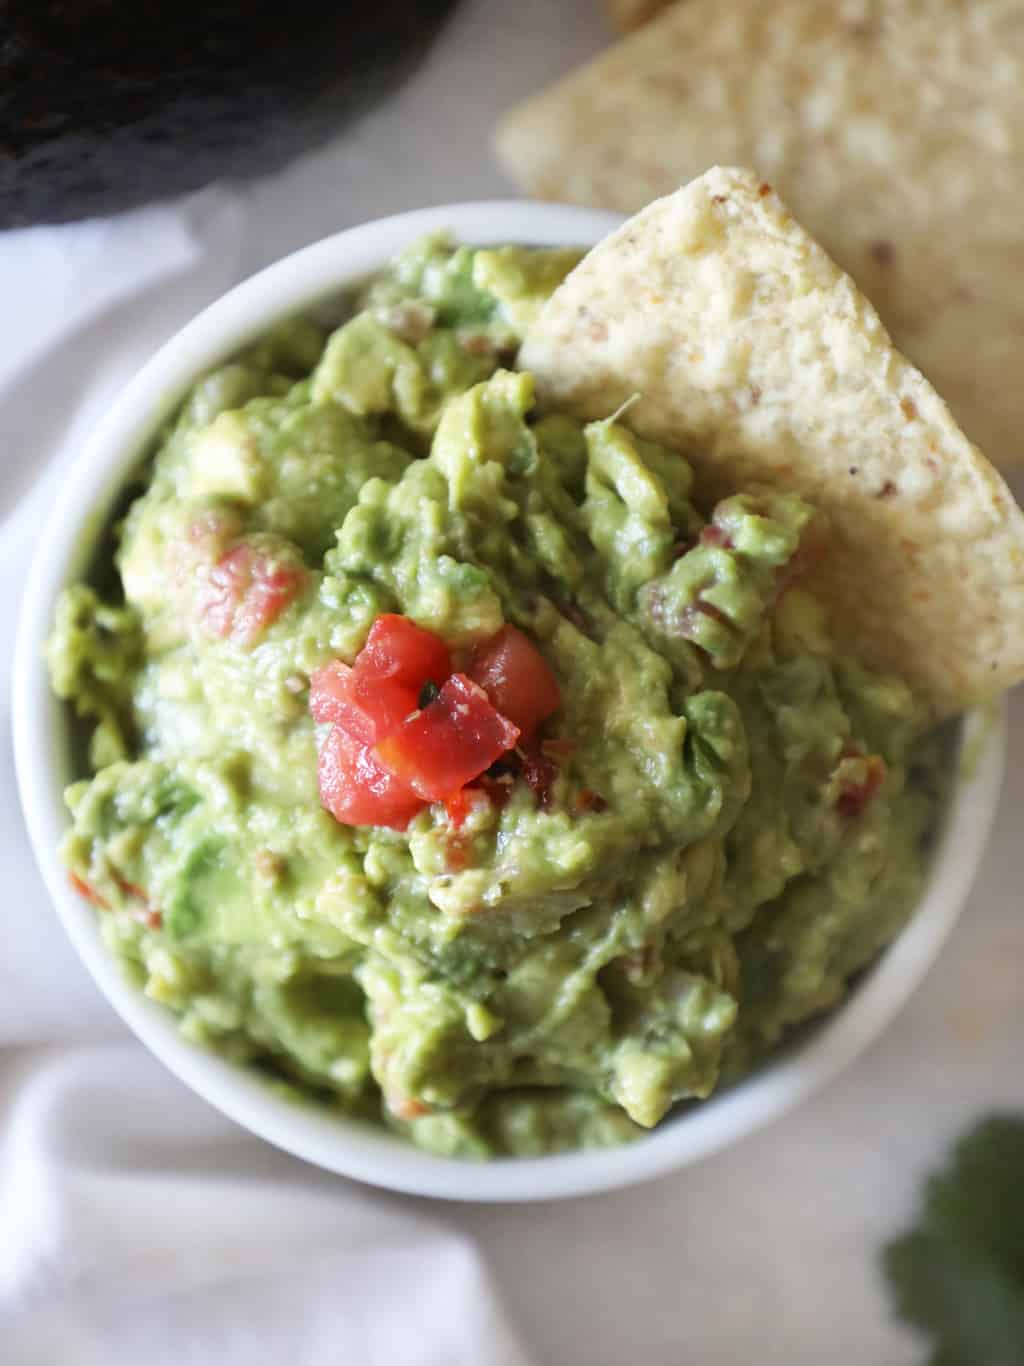 homemade guacamole in a white bowl with a chip sticking out of it